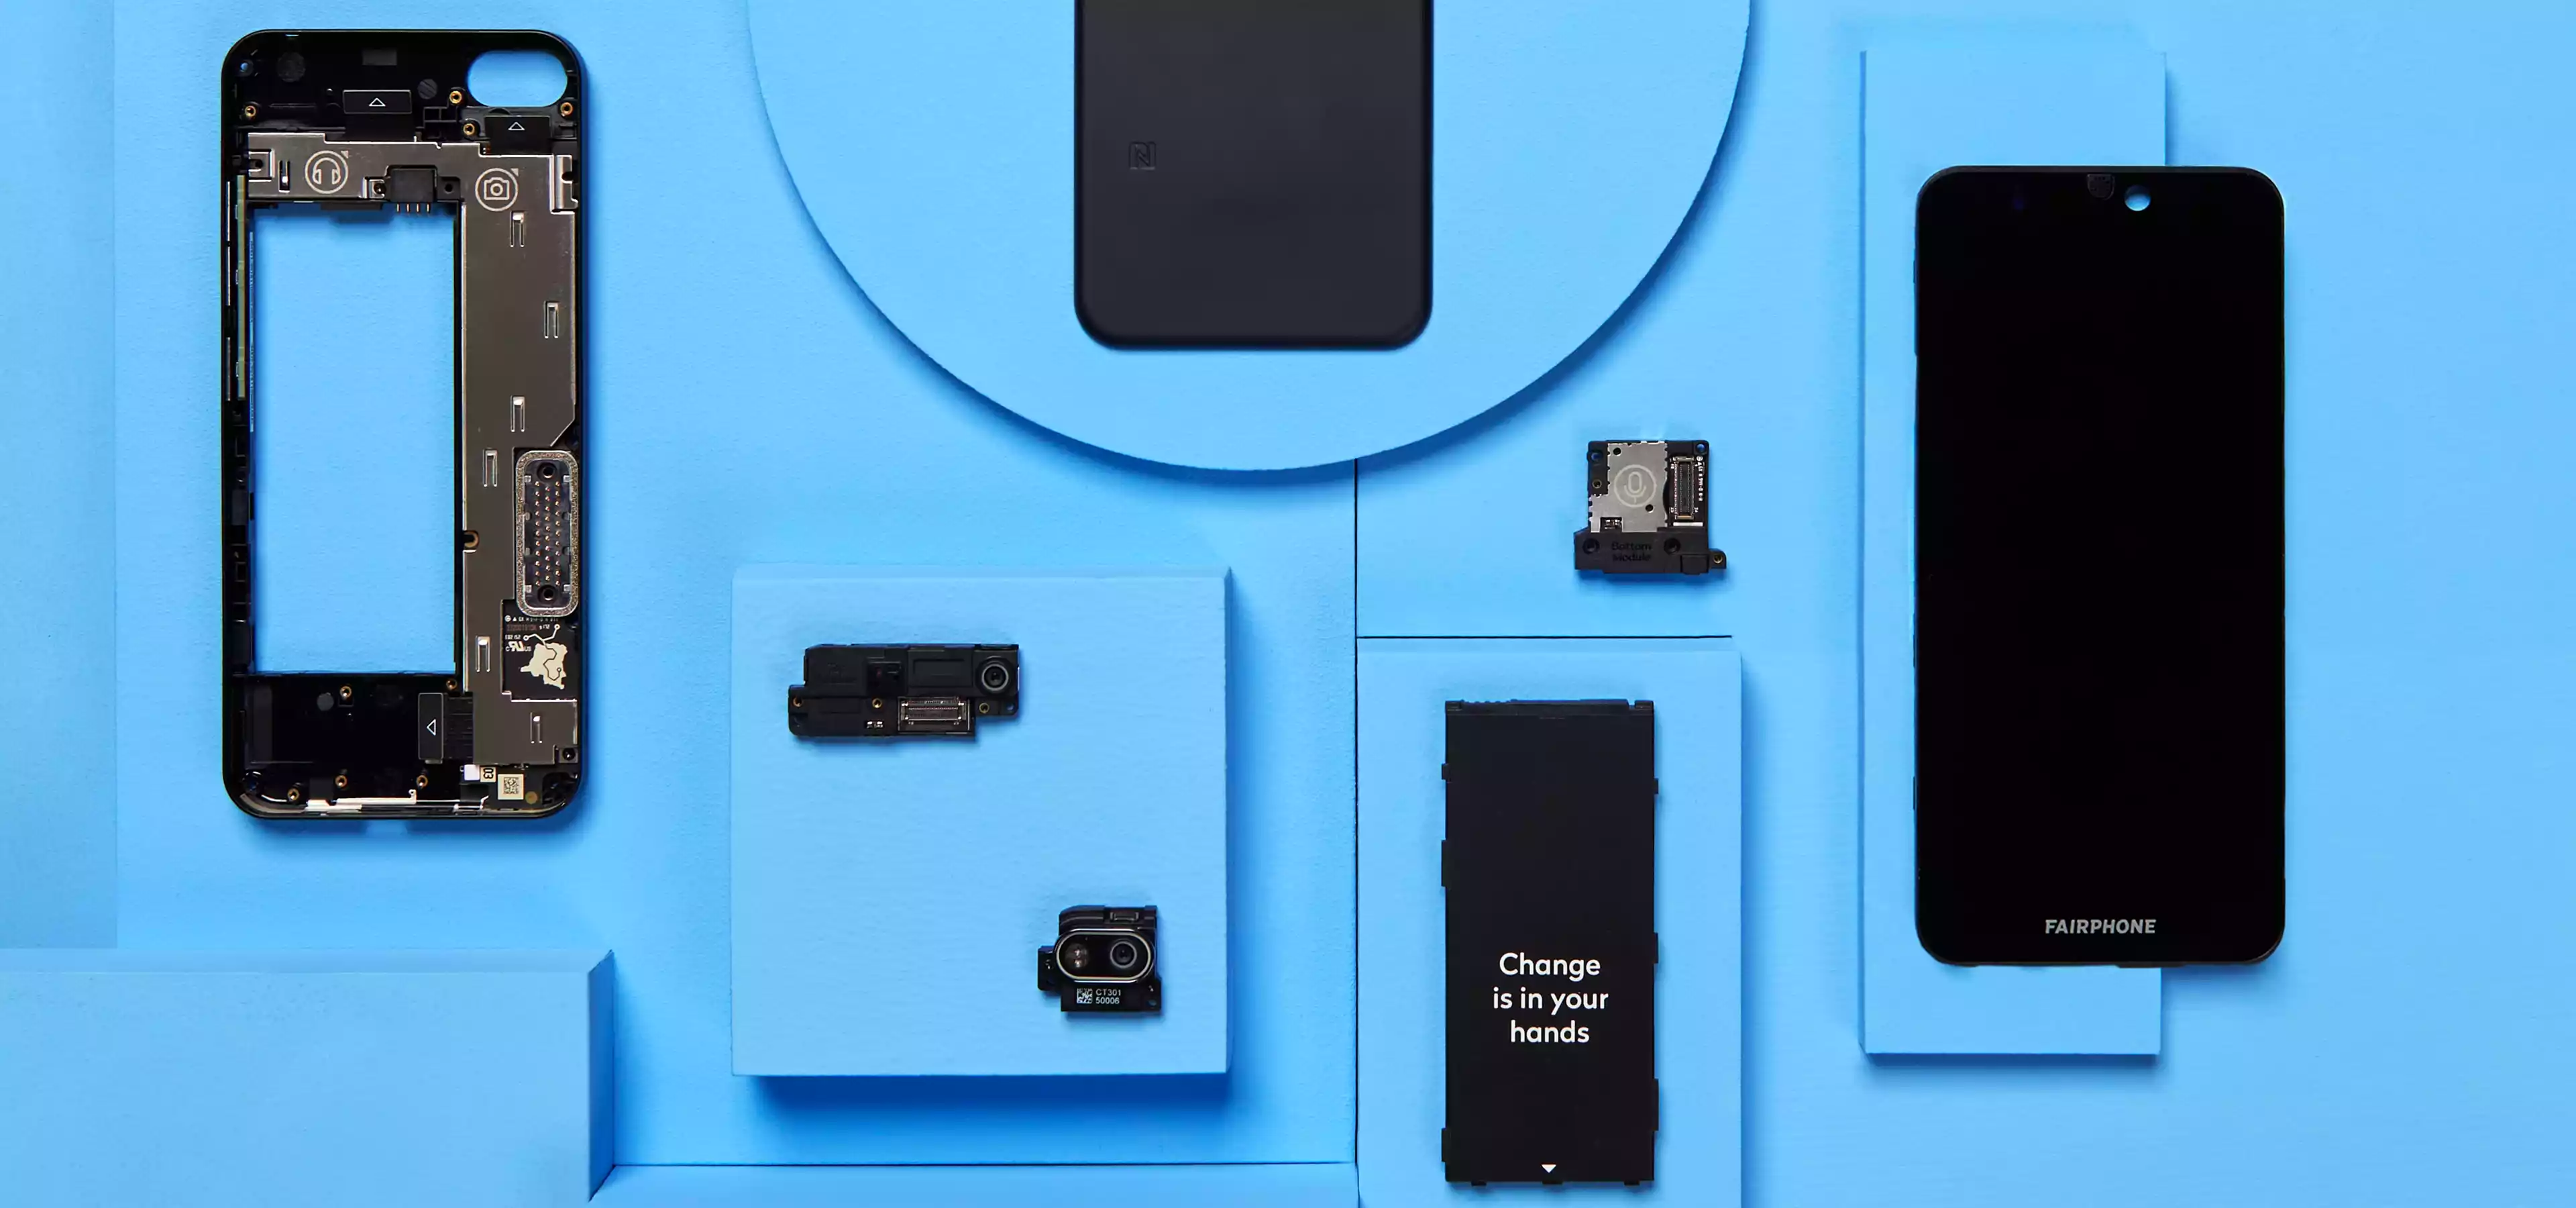 Fairphone was the first fully repairable smart phone and a great example of the circular economy